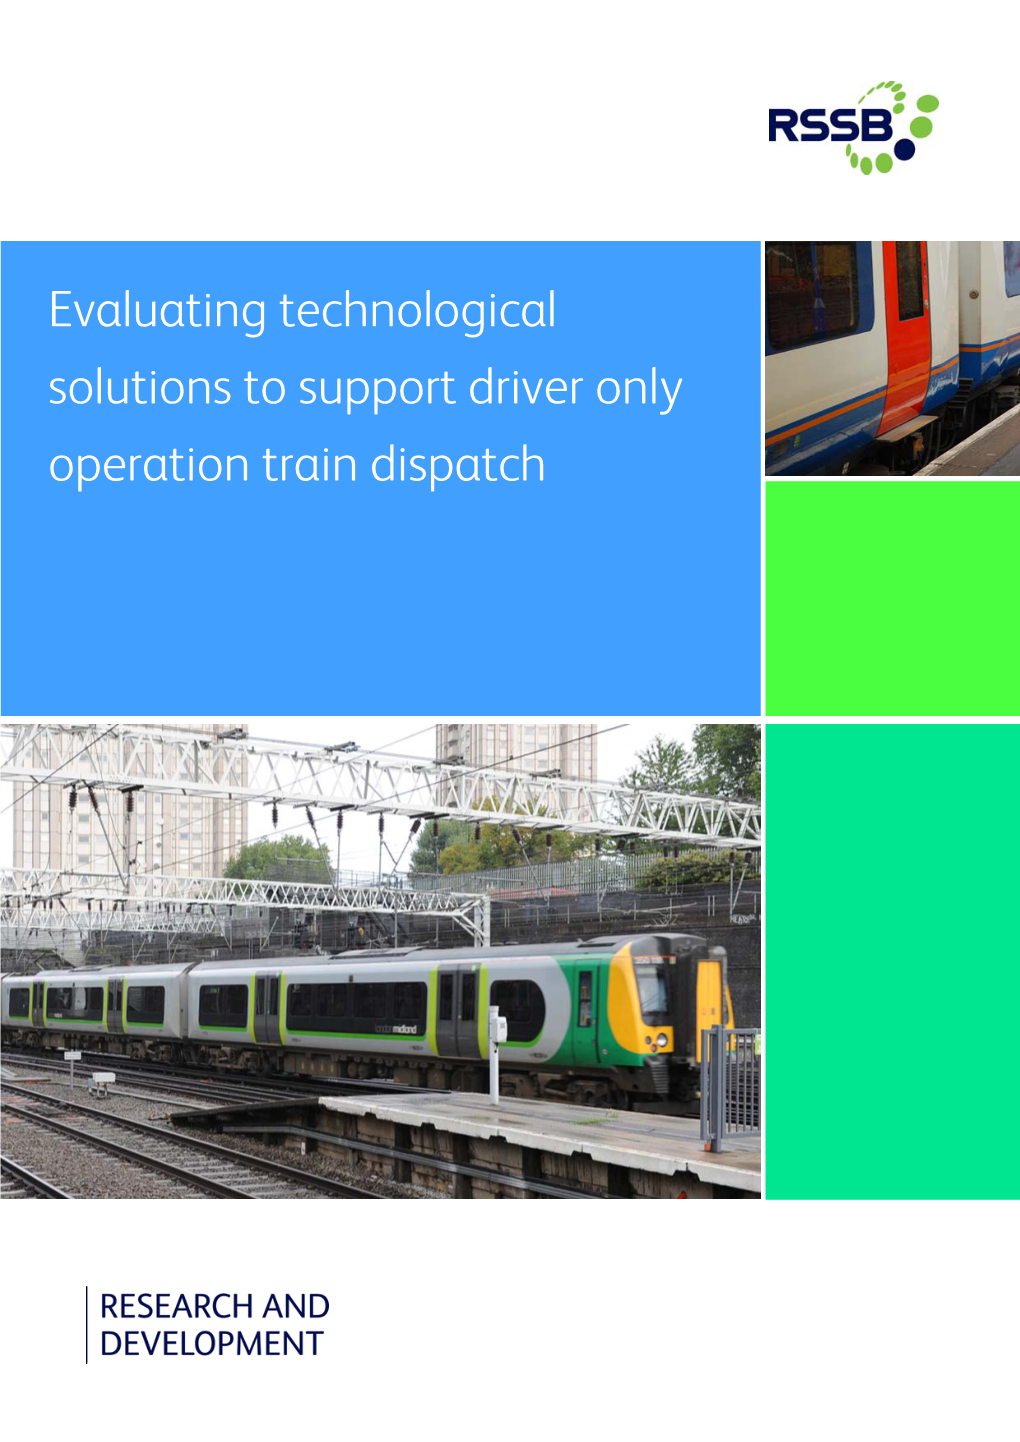 Evaluating Technological Solutions to Support Driver Only Operation Train Dispatch Copyright © RAIL SAFETY and STANDARDS BOARD LTD